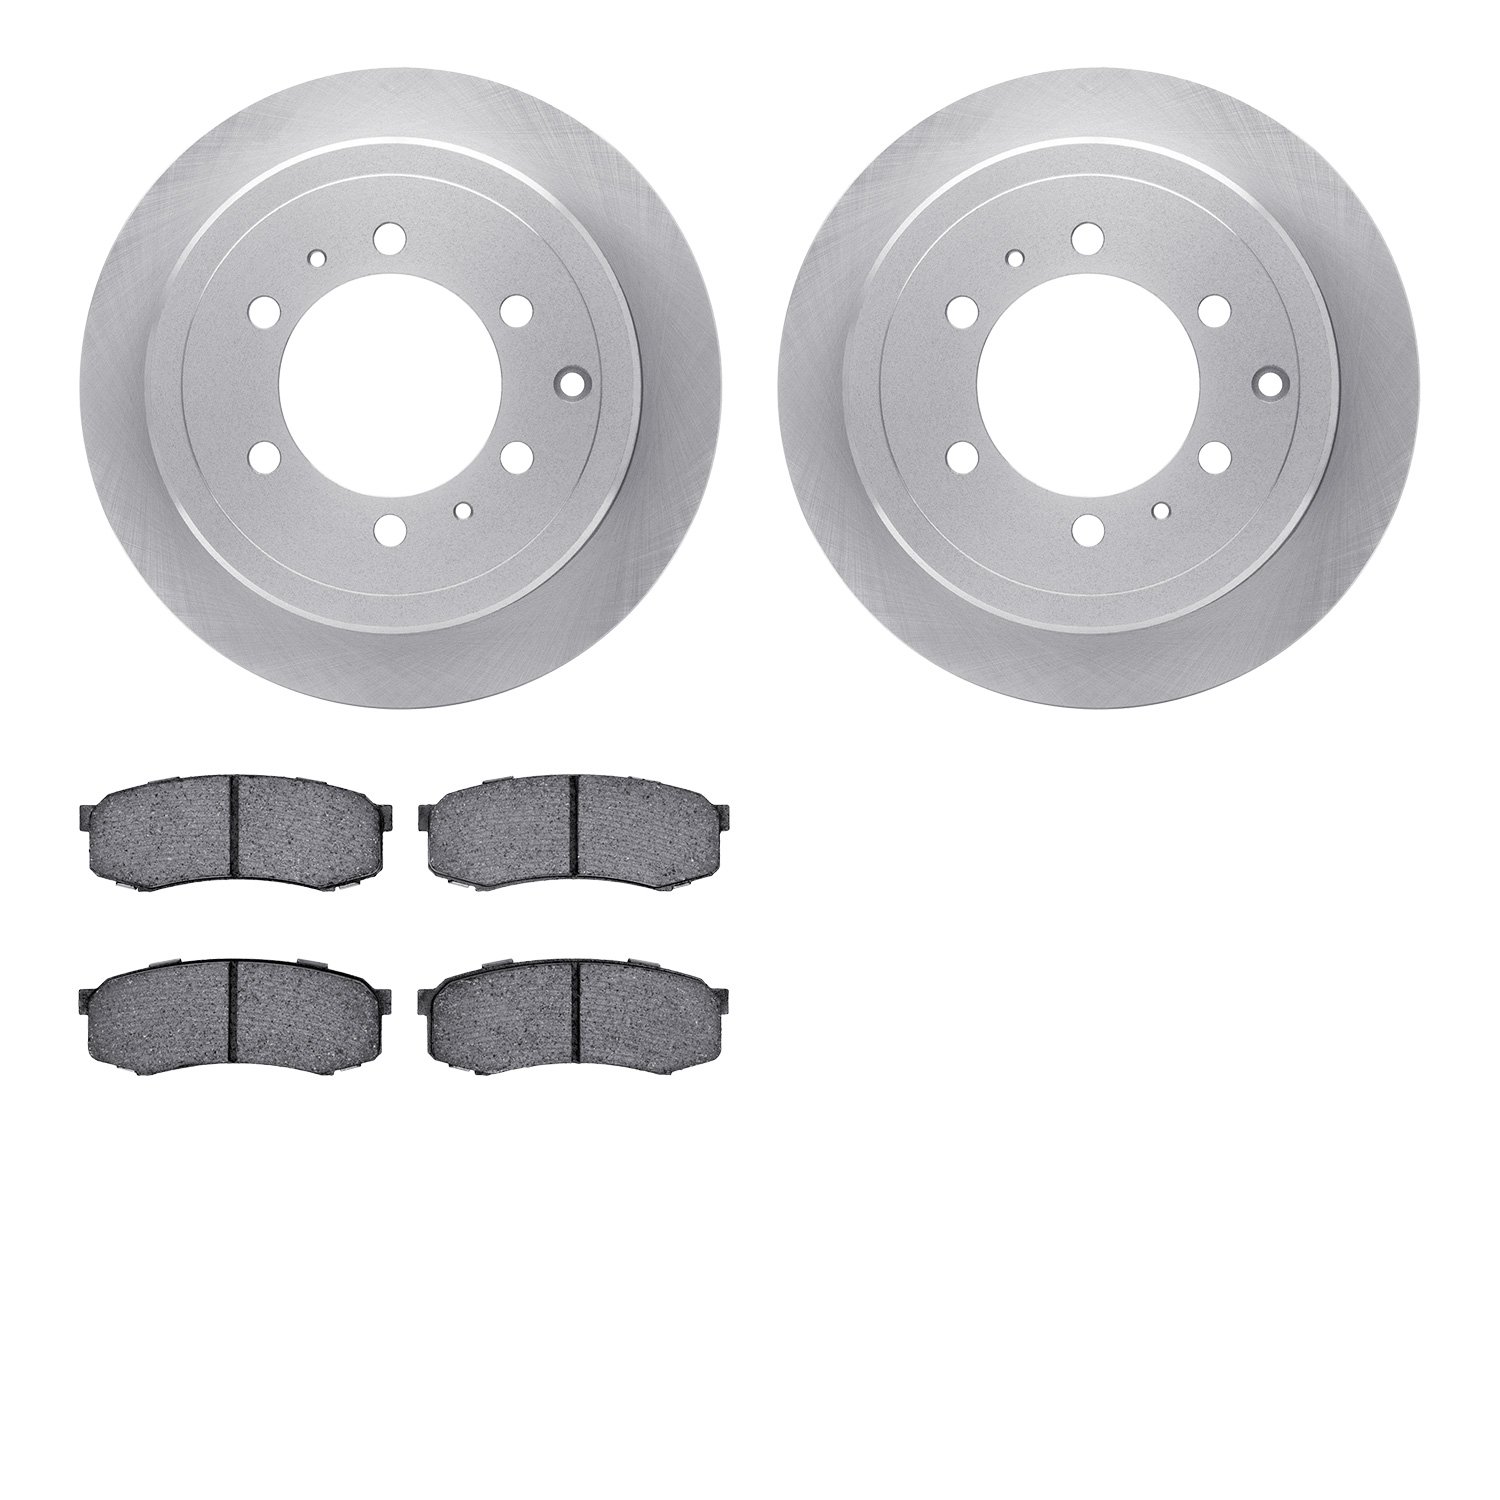 6402-76028 Brake Rotors with Ultimate-Duty Brake Pads, 1993-1997 Lexus/Toyota/Scion, Position: Rear